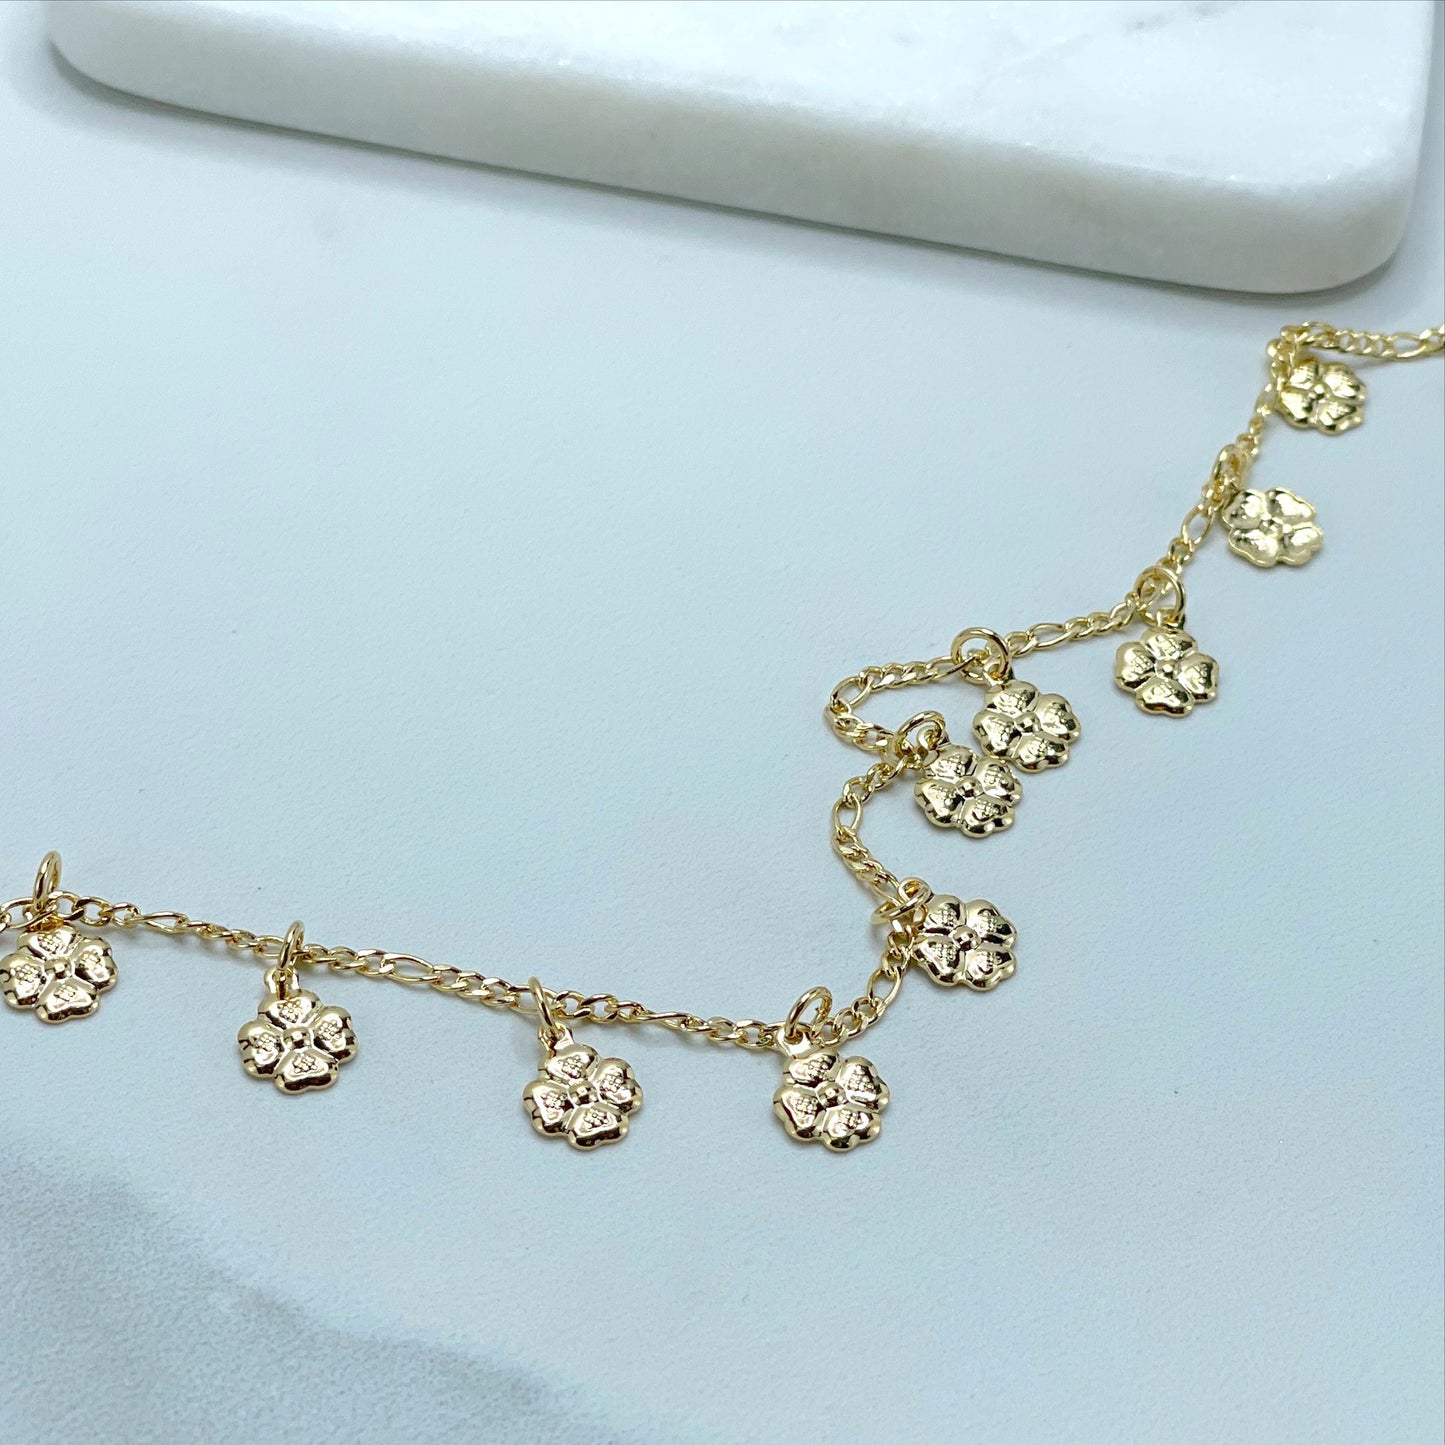 18k Gold Filled 2mm Figaro Link, Flowers Charms Anklet Wholesale Jewelry Supplies